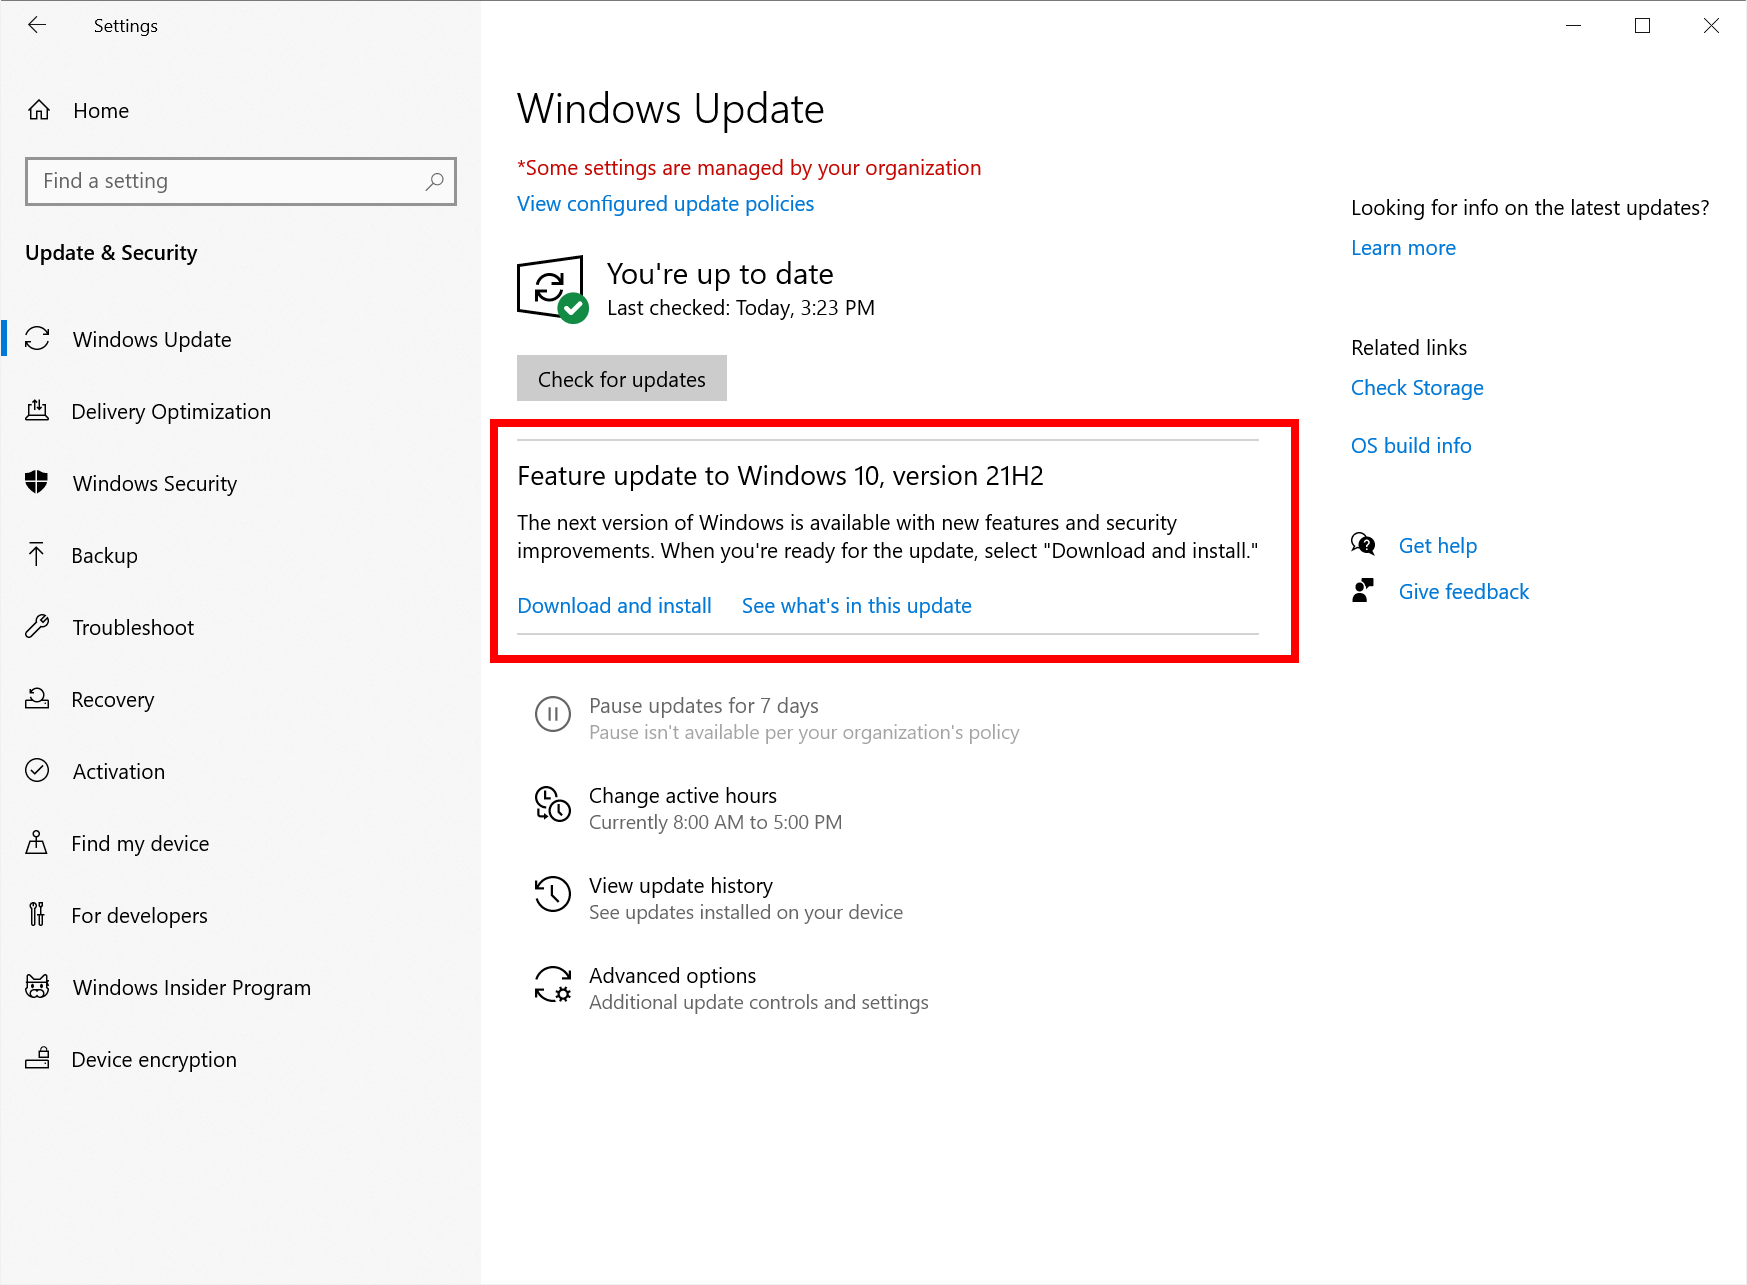 Go to the Windows Update settings and check for any available updates.
Install all the latest updates for Windows.